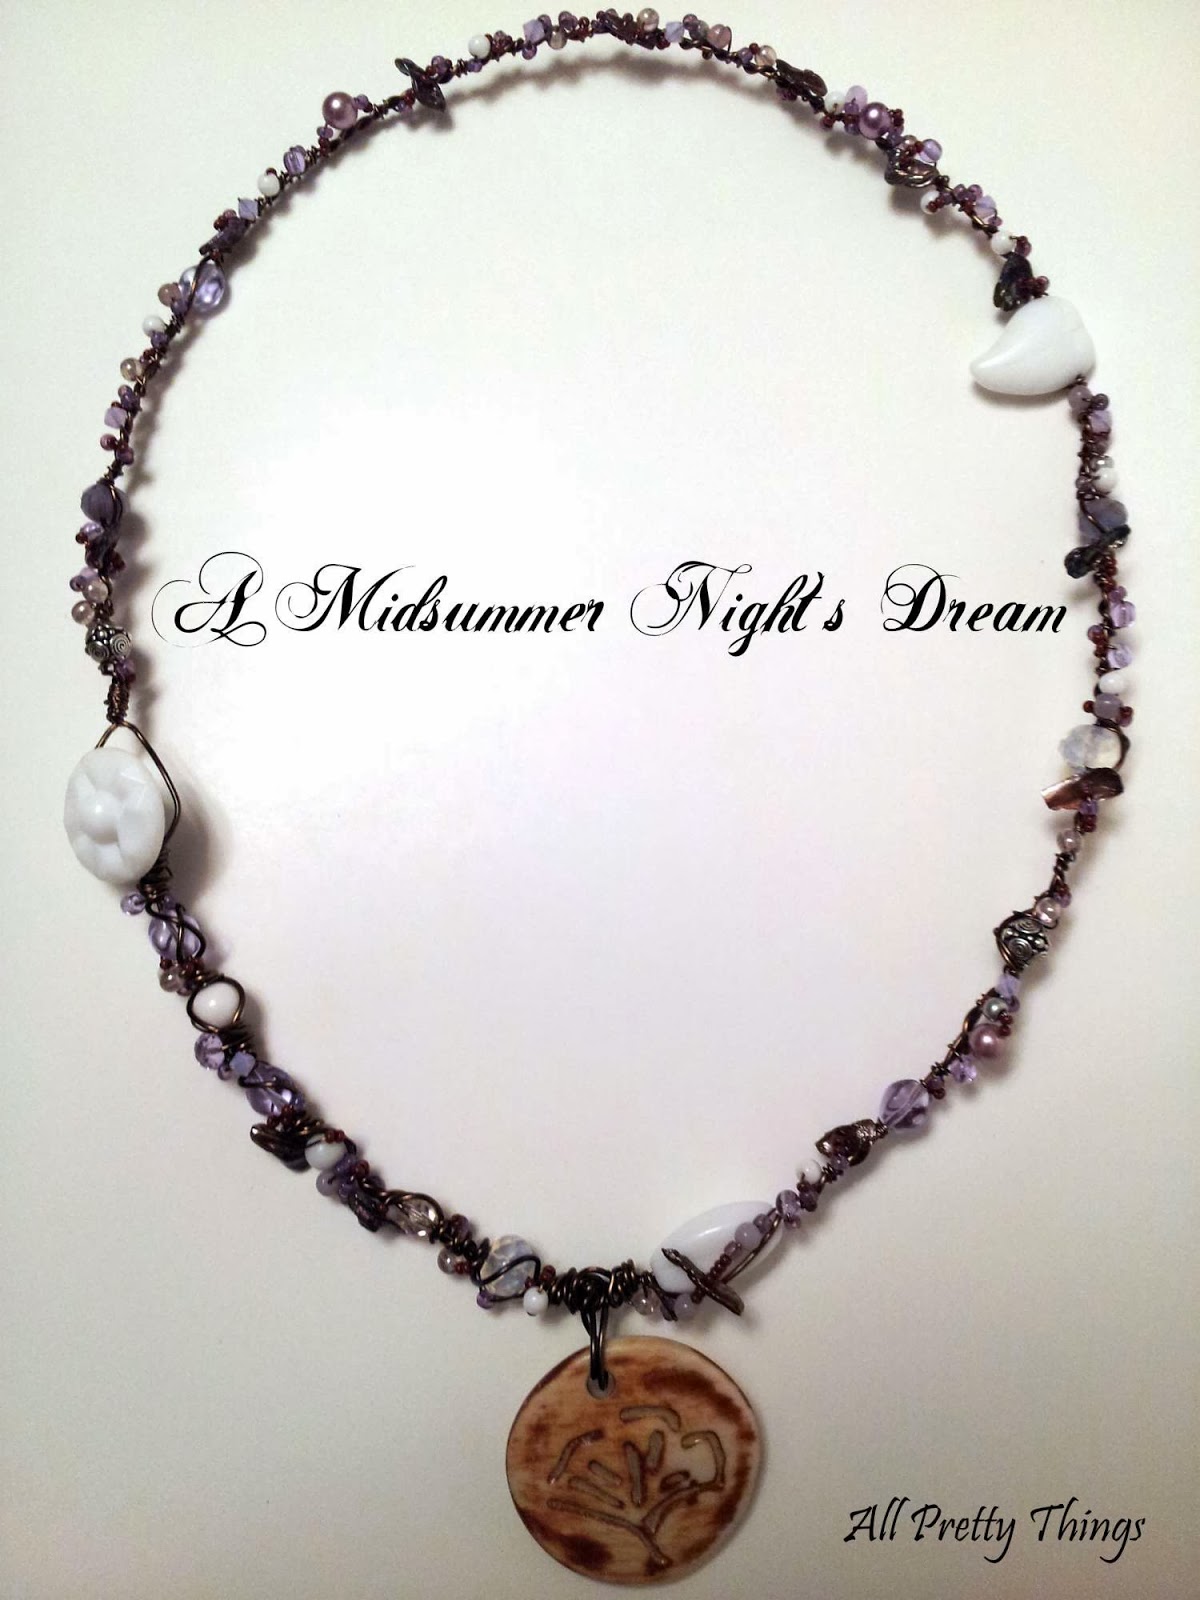 A Midsummer Night's Dream: organic, lush, ooak necklace with wire wrapped elements and Marla James ceramic focal :: All Pretty Things